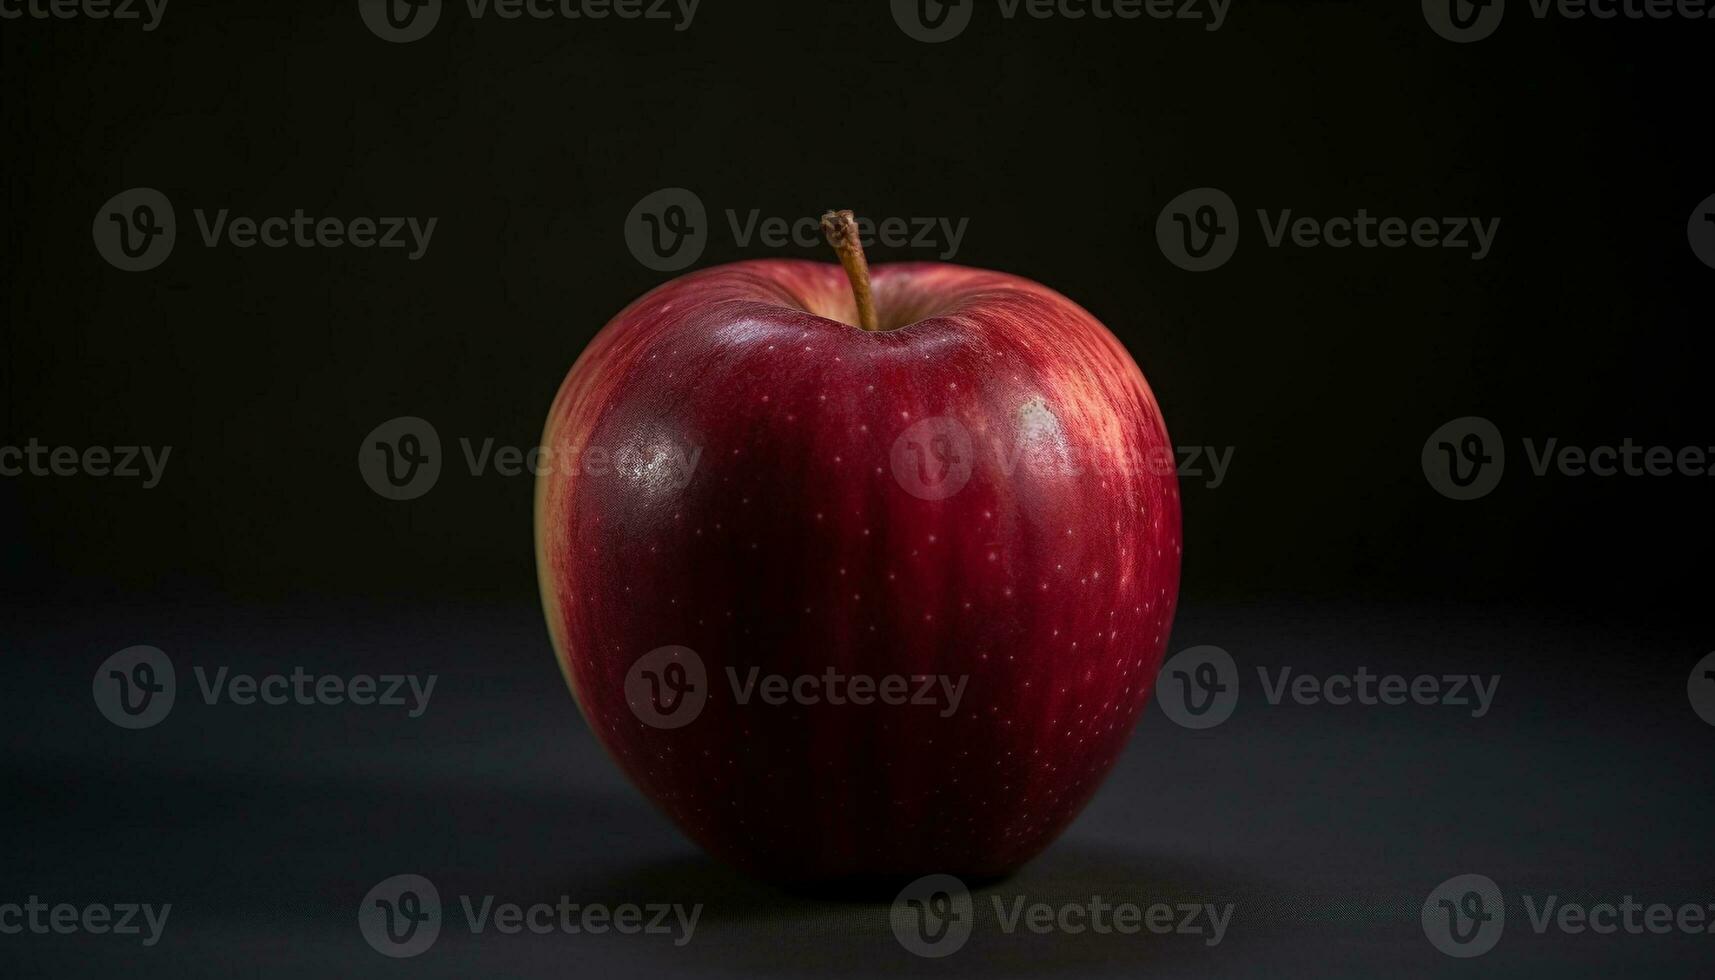 Juicy apple embodies freshness and healthy eating in nature perfection generated by AI photo